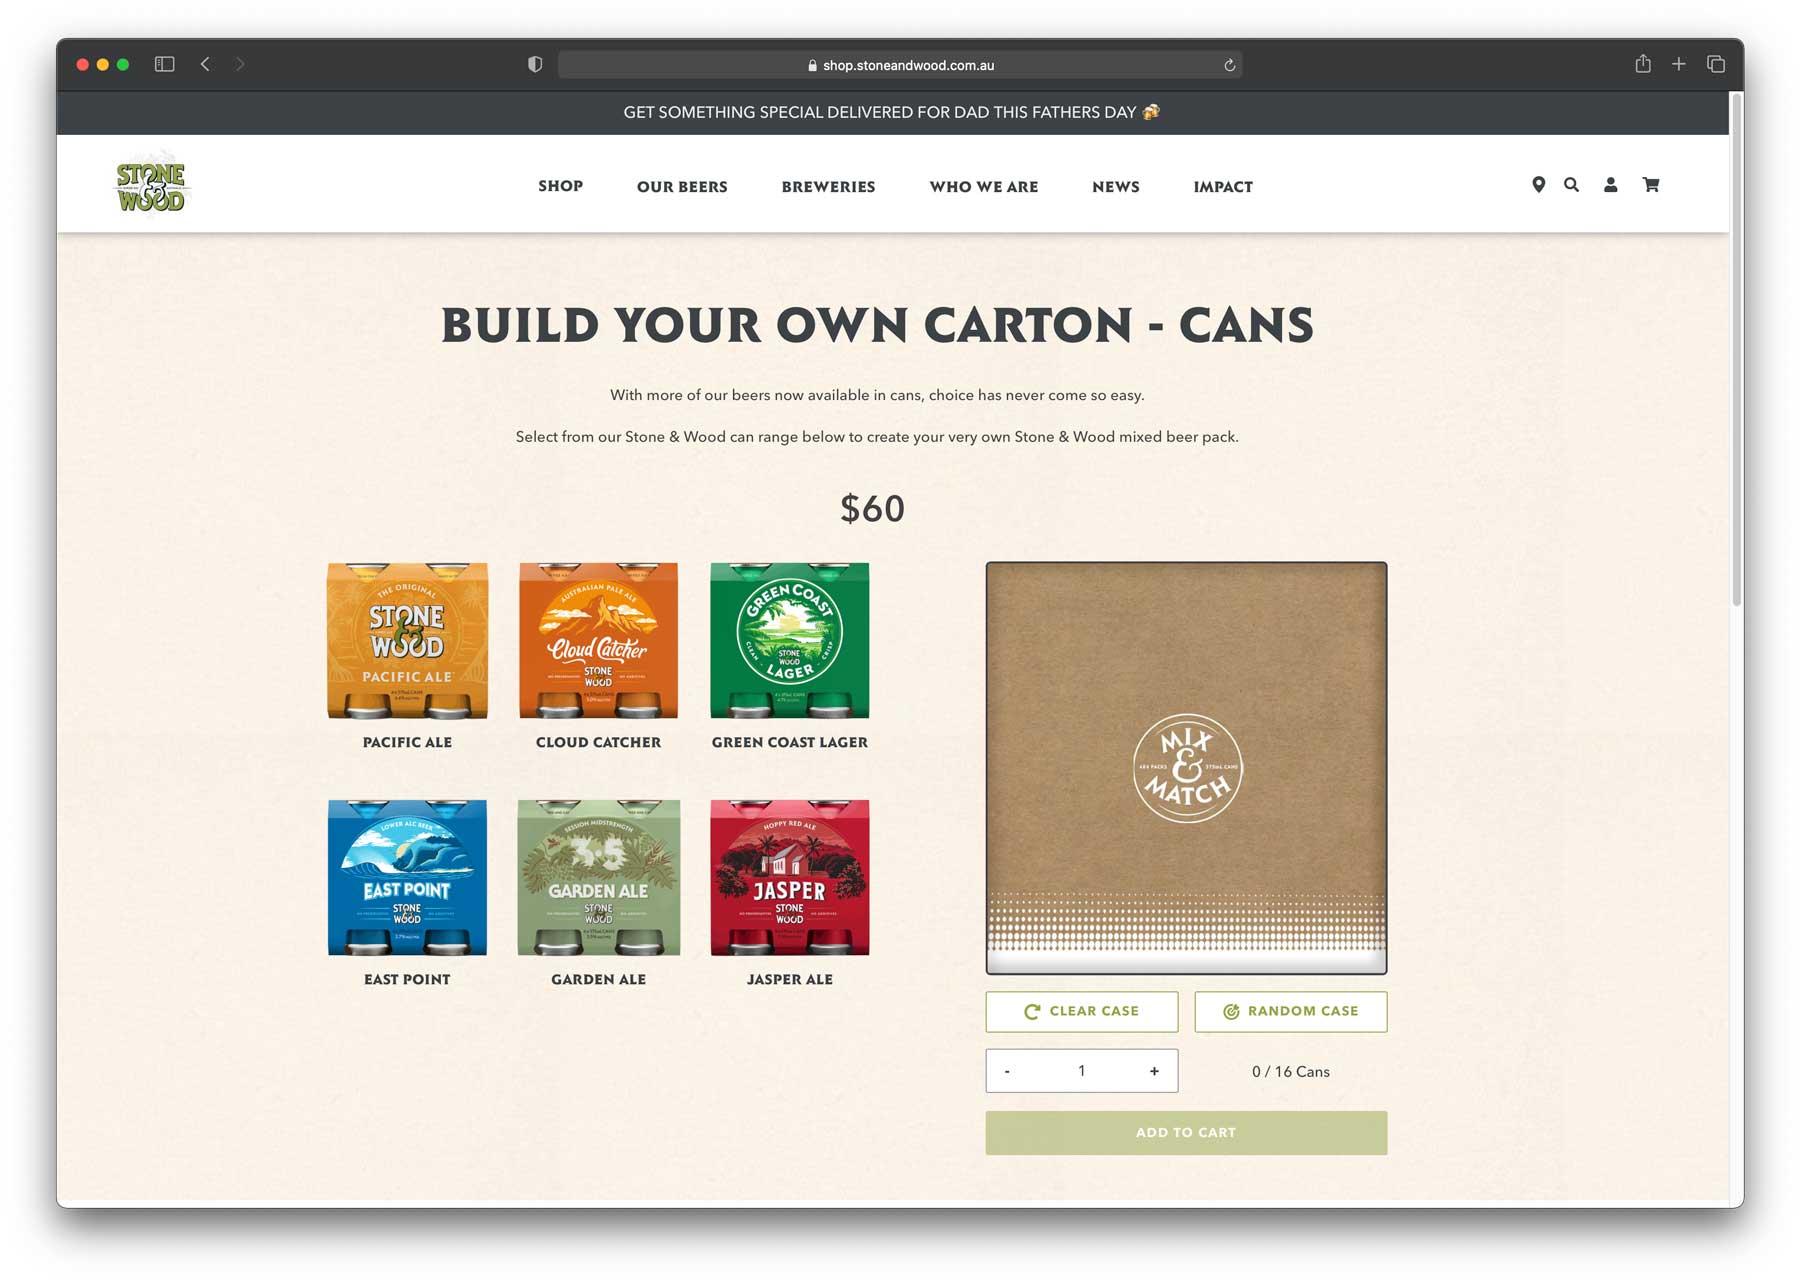 Stone & Wood Build Your Own Carton developed by Artie Codes